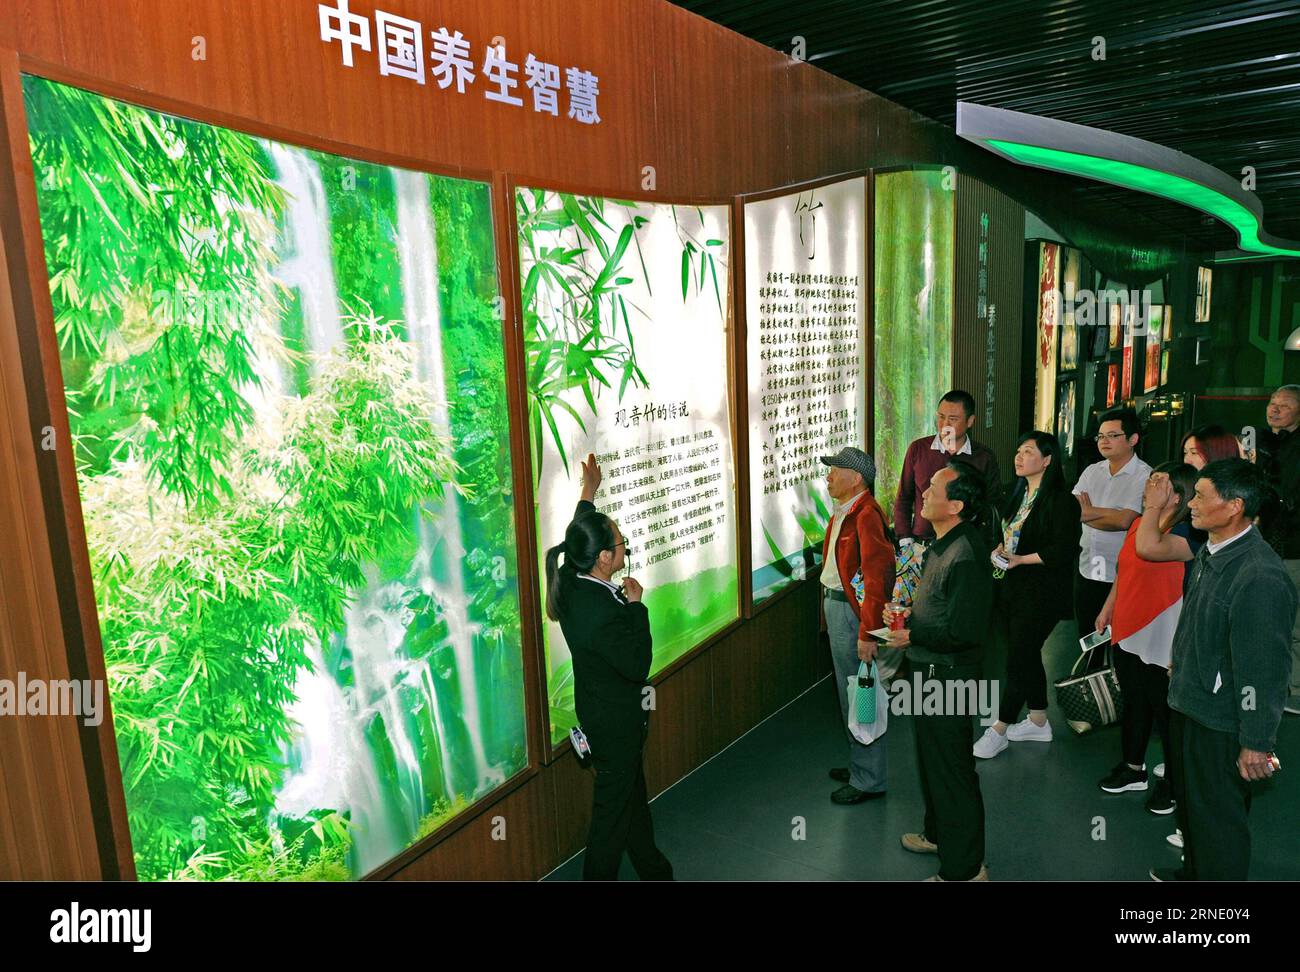 (160605) -- ANJI, June 5, 2016 -- A staff member introduces the knowledge of bamboo and health in a biotechnology company in Anji County, east China s Zhejiang Province, June 3, 2016. Anji is known for its pleasant environment with flourishing bamboo plantations and many scenes from the famous movie Crouching Tiger, Hidden Dragon were shot here. The county persists in green, low-carbon development, and strives to protect environment as well as to develop local economy. June 5 is observed as World Environment Day every year, and this year s theme issued by China s Ministry of Environment Protec Stock Photo